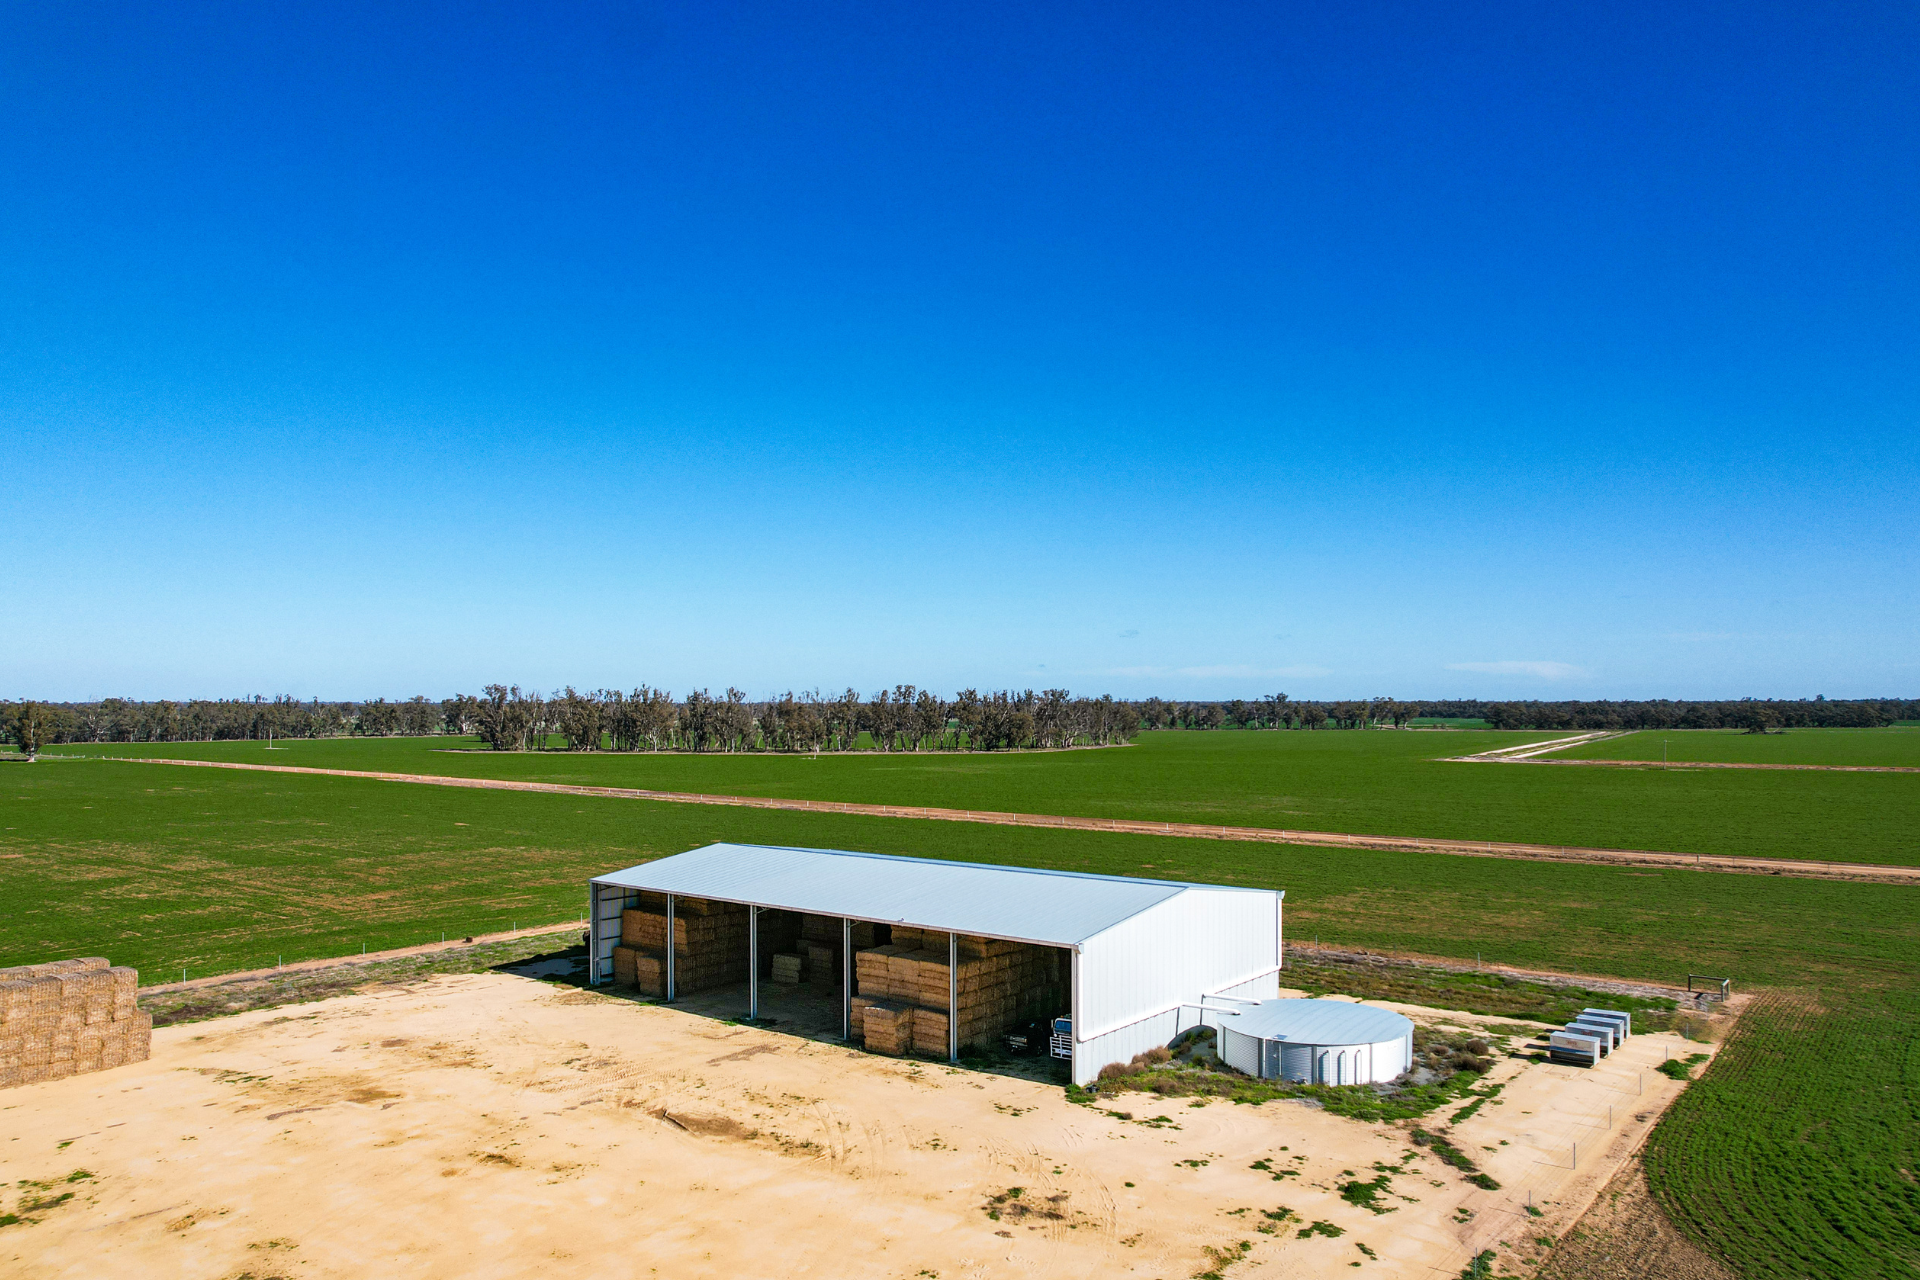 You are currently viewing 41.25m x 24m x 7.5m hay shed